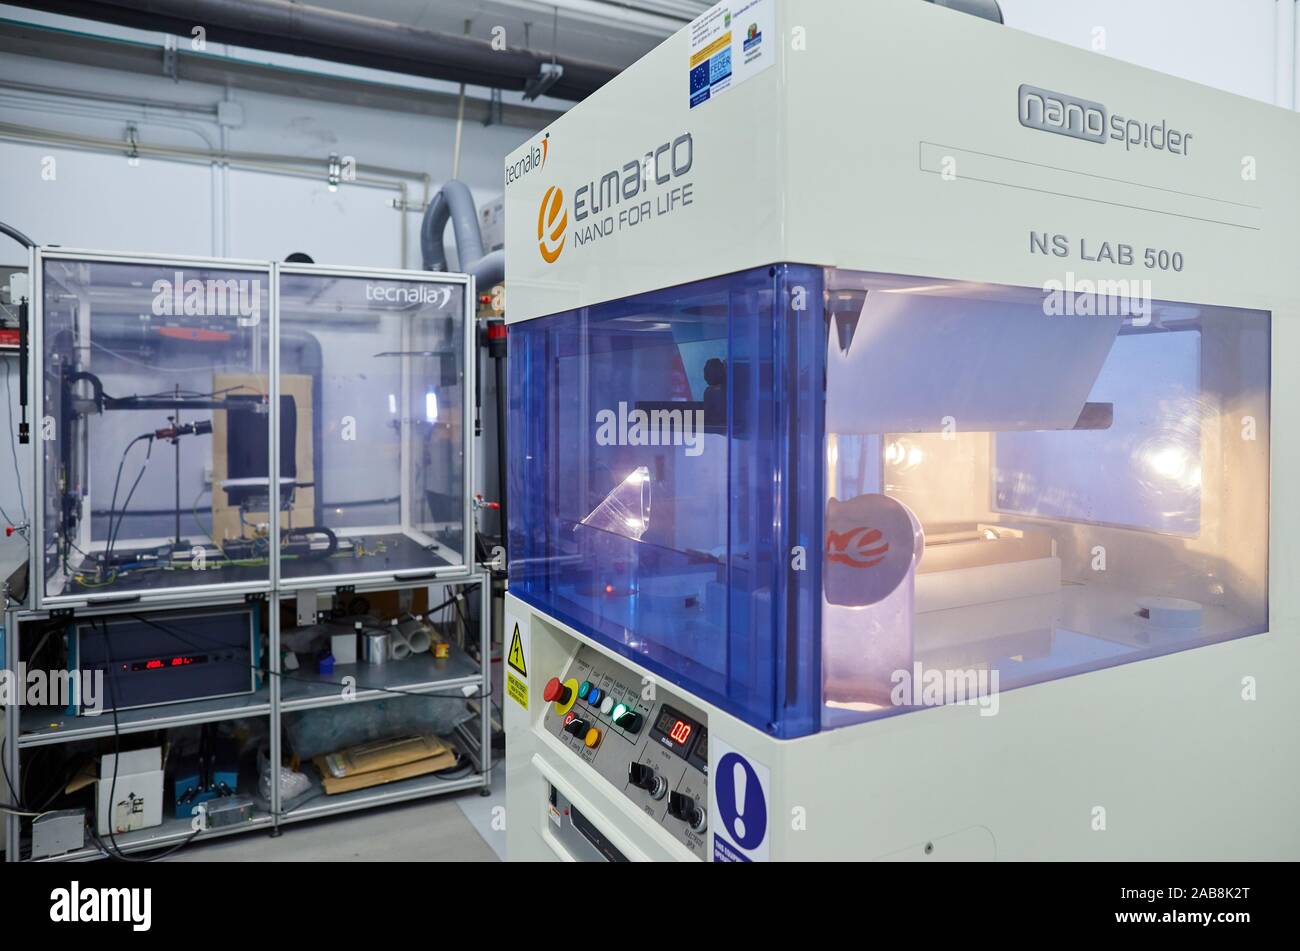 Nano spider, Electrospinning nanofiber manufacturing equipment for the development of intelligent and functional materials, Aerospace Industry, Stock Photo